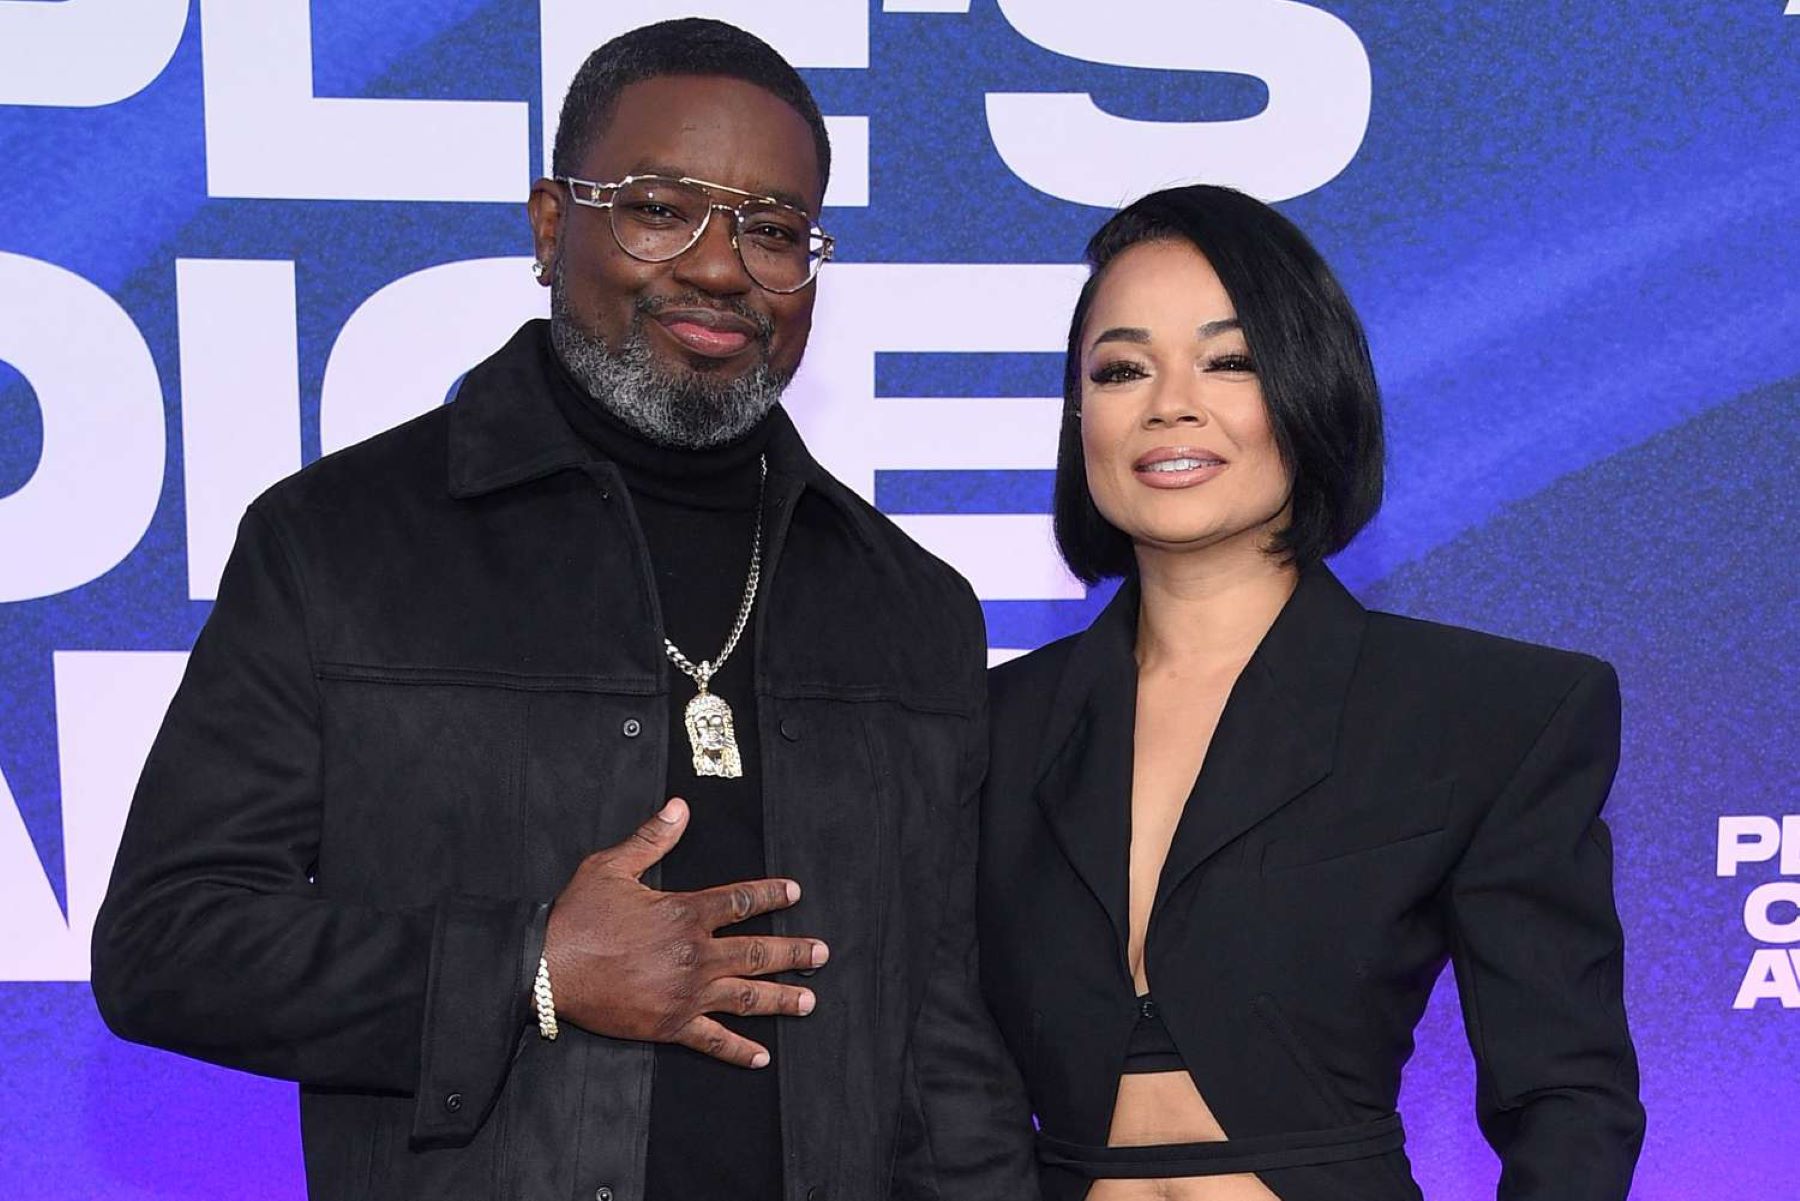 lil-rel-howerys-proposal-to-gf-almost-ruined-by-bathroom-break-at-beyonce-concert